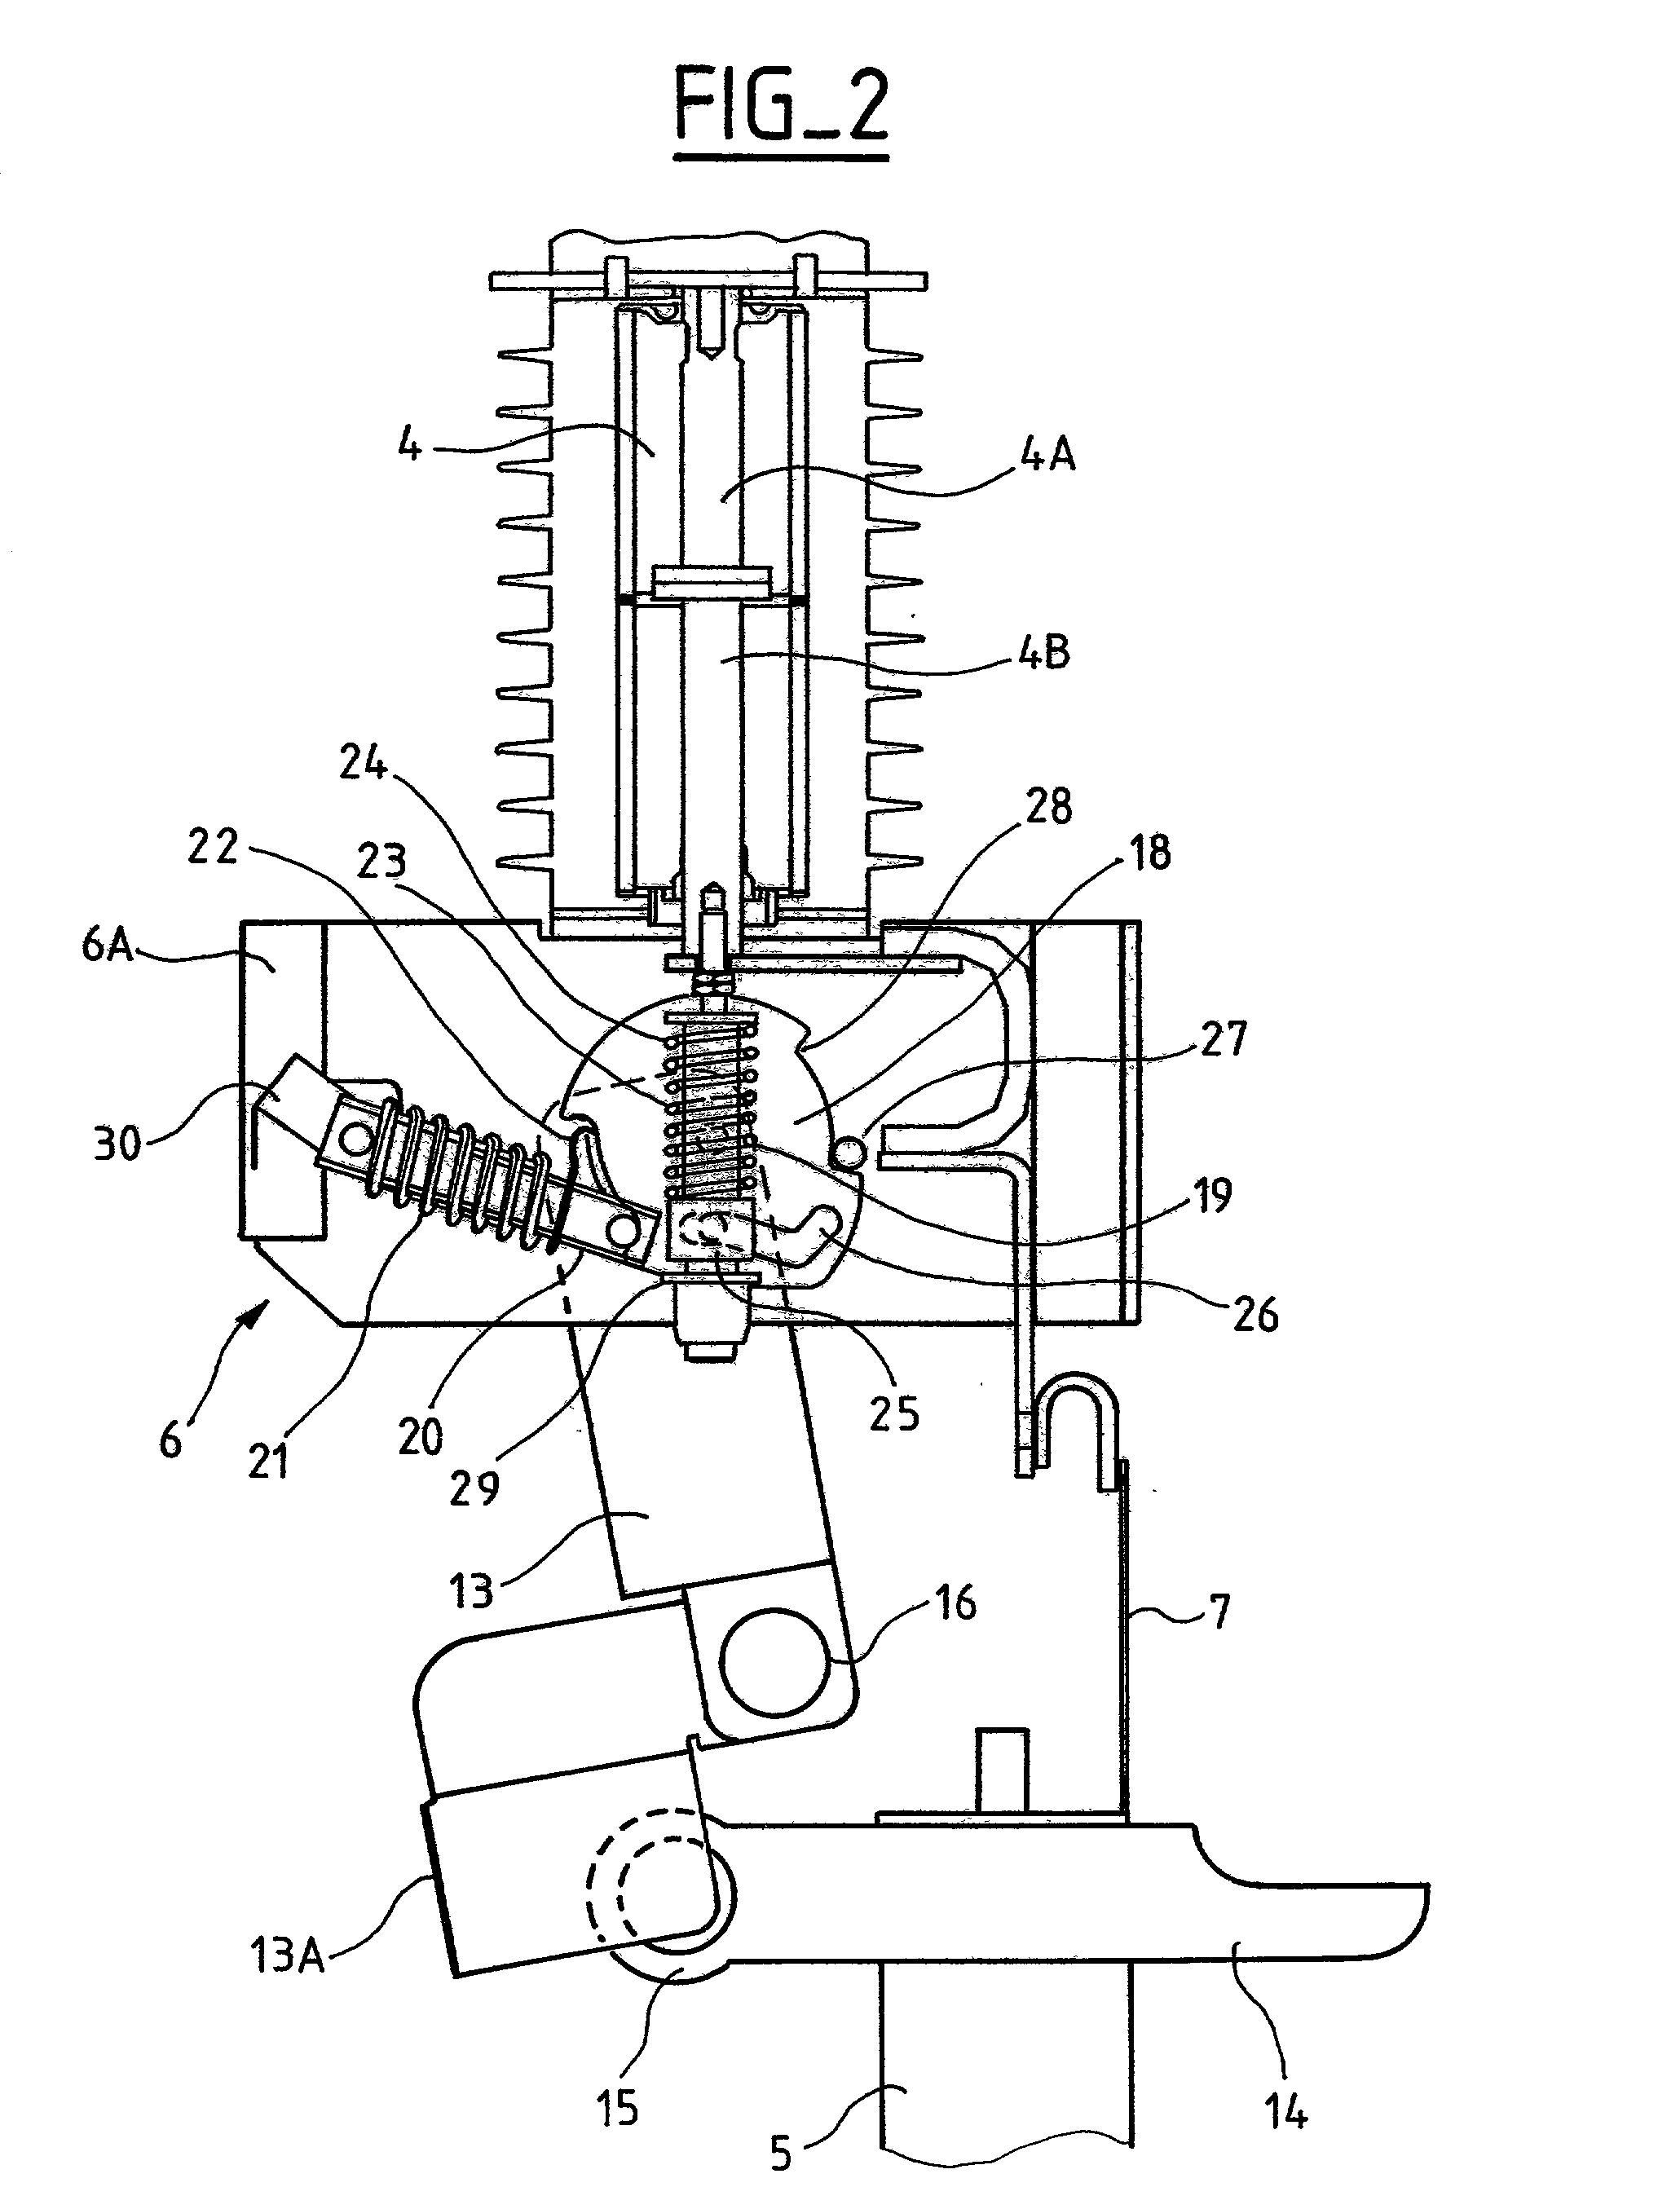 Safety device applied to engaging and disengaging a fuse in medium voltage electrical gear